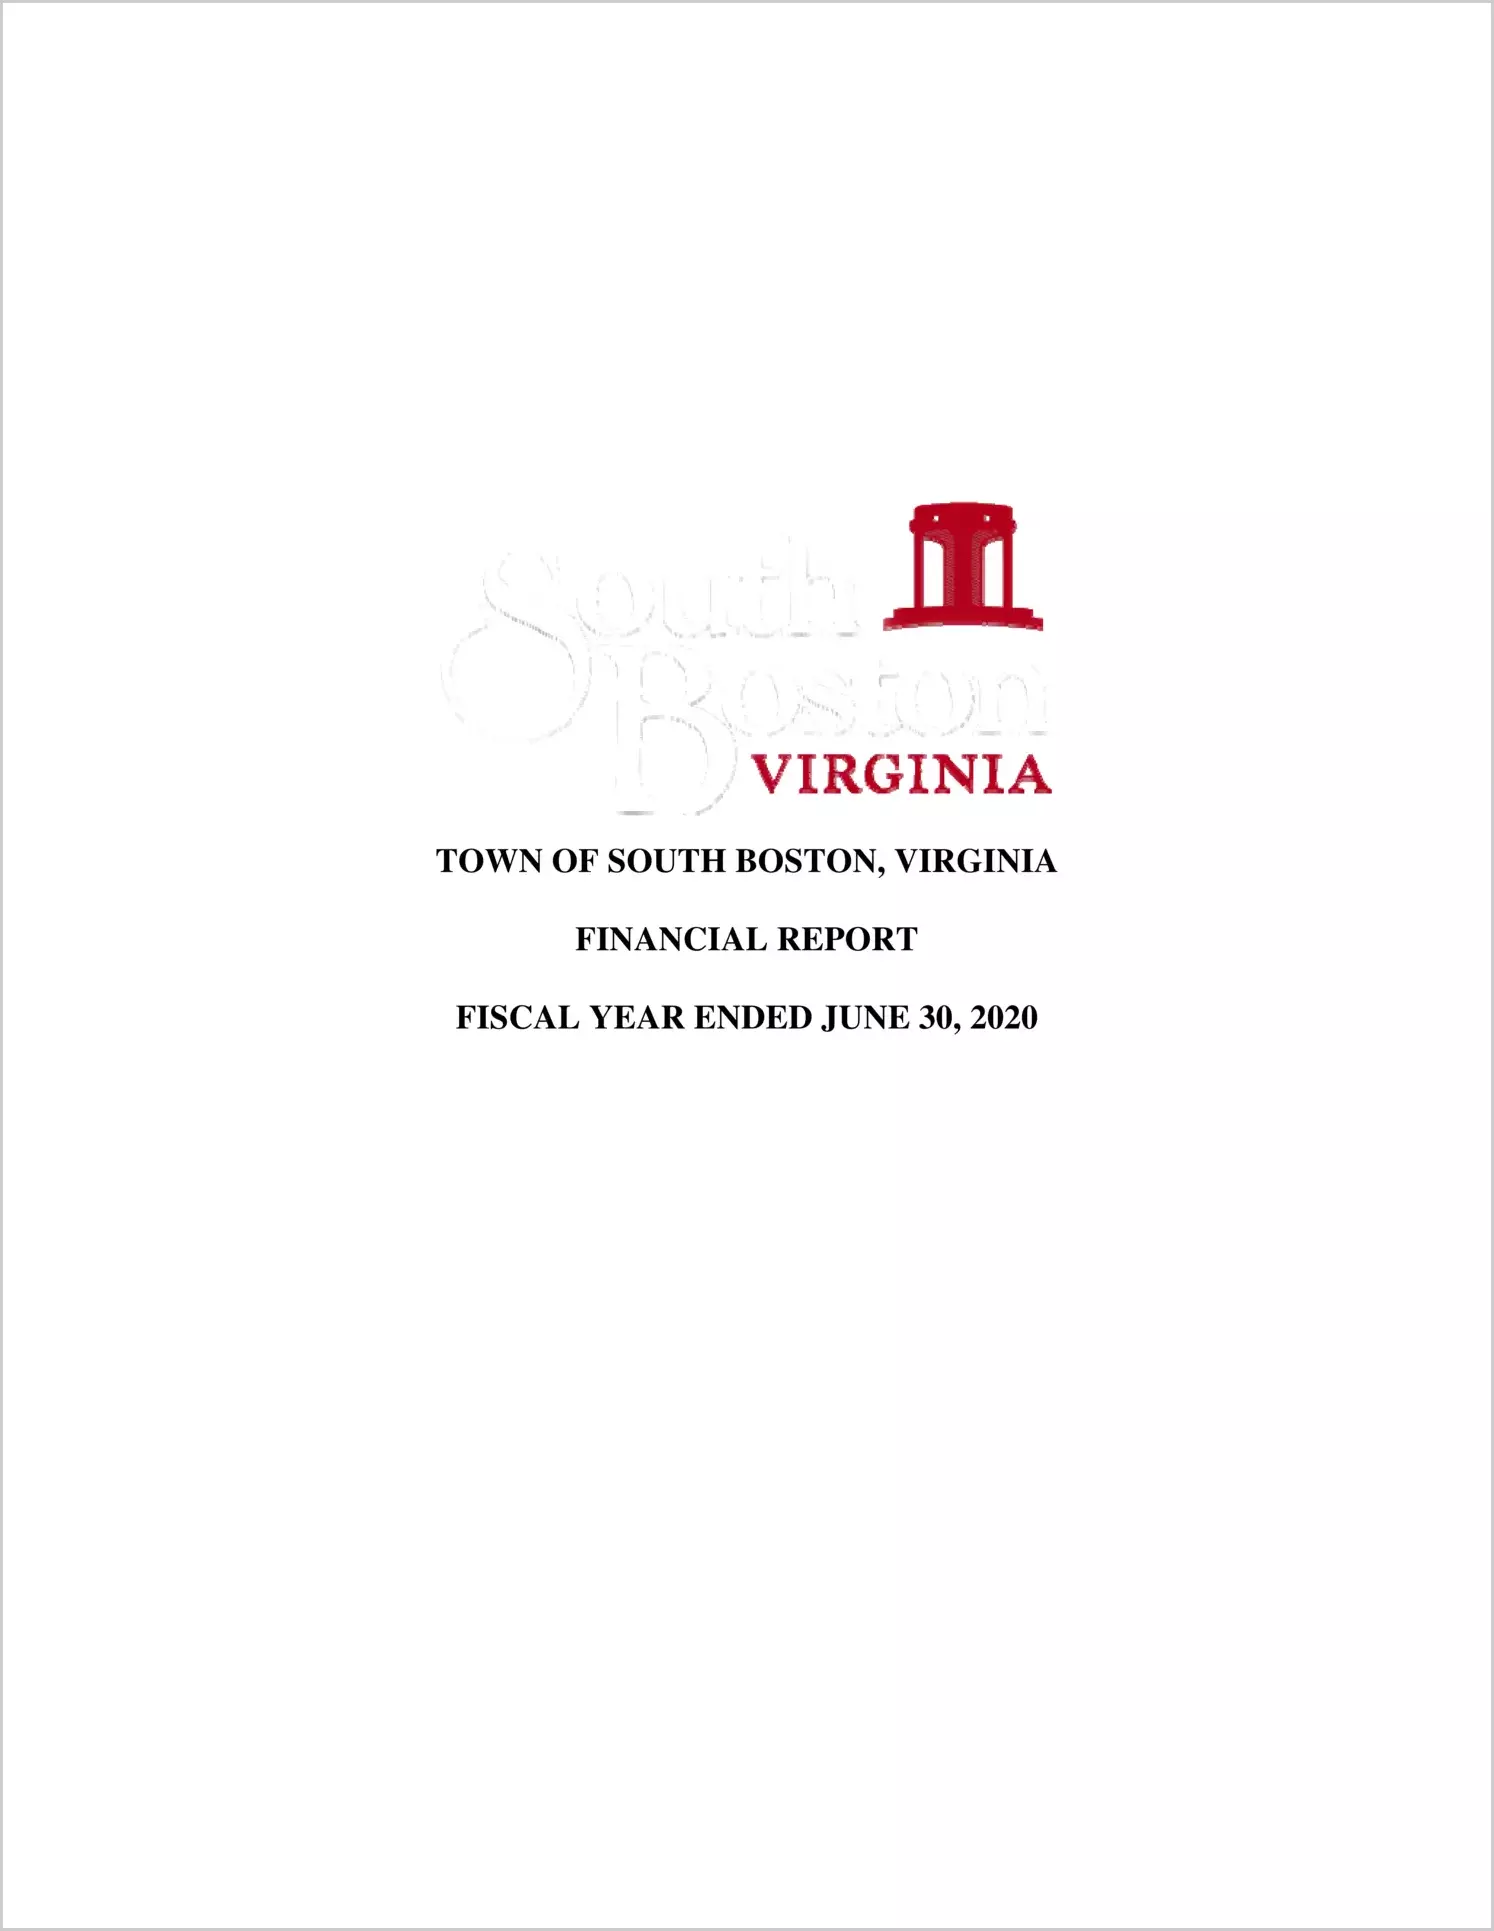 2020 Annual Financial Report for Town of South Boston